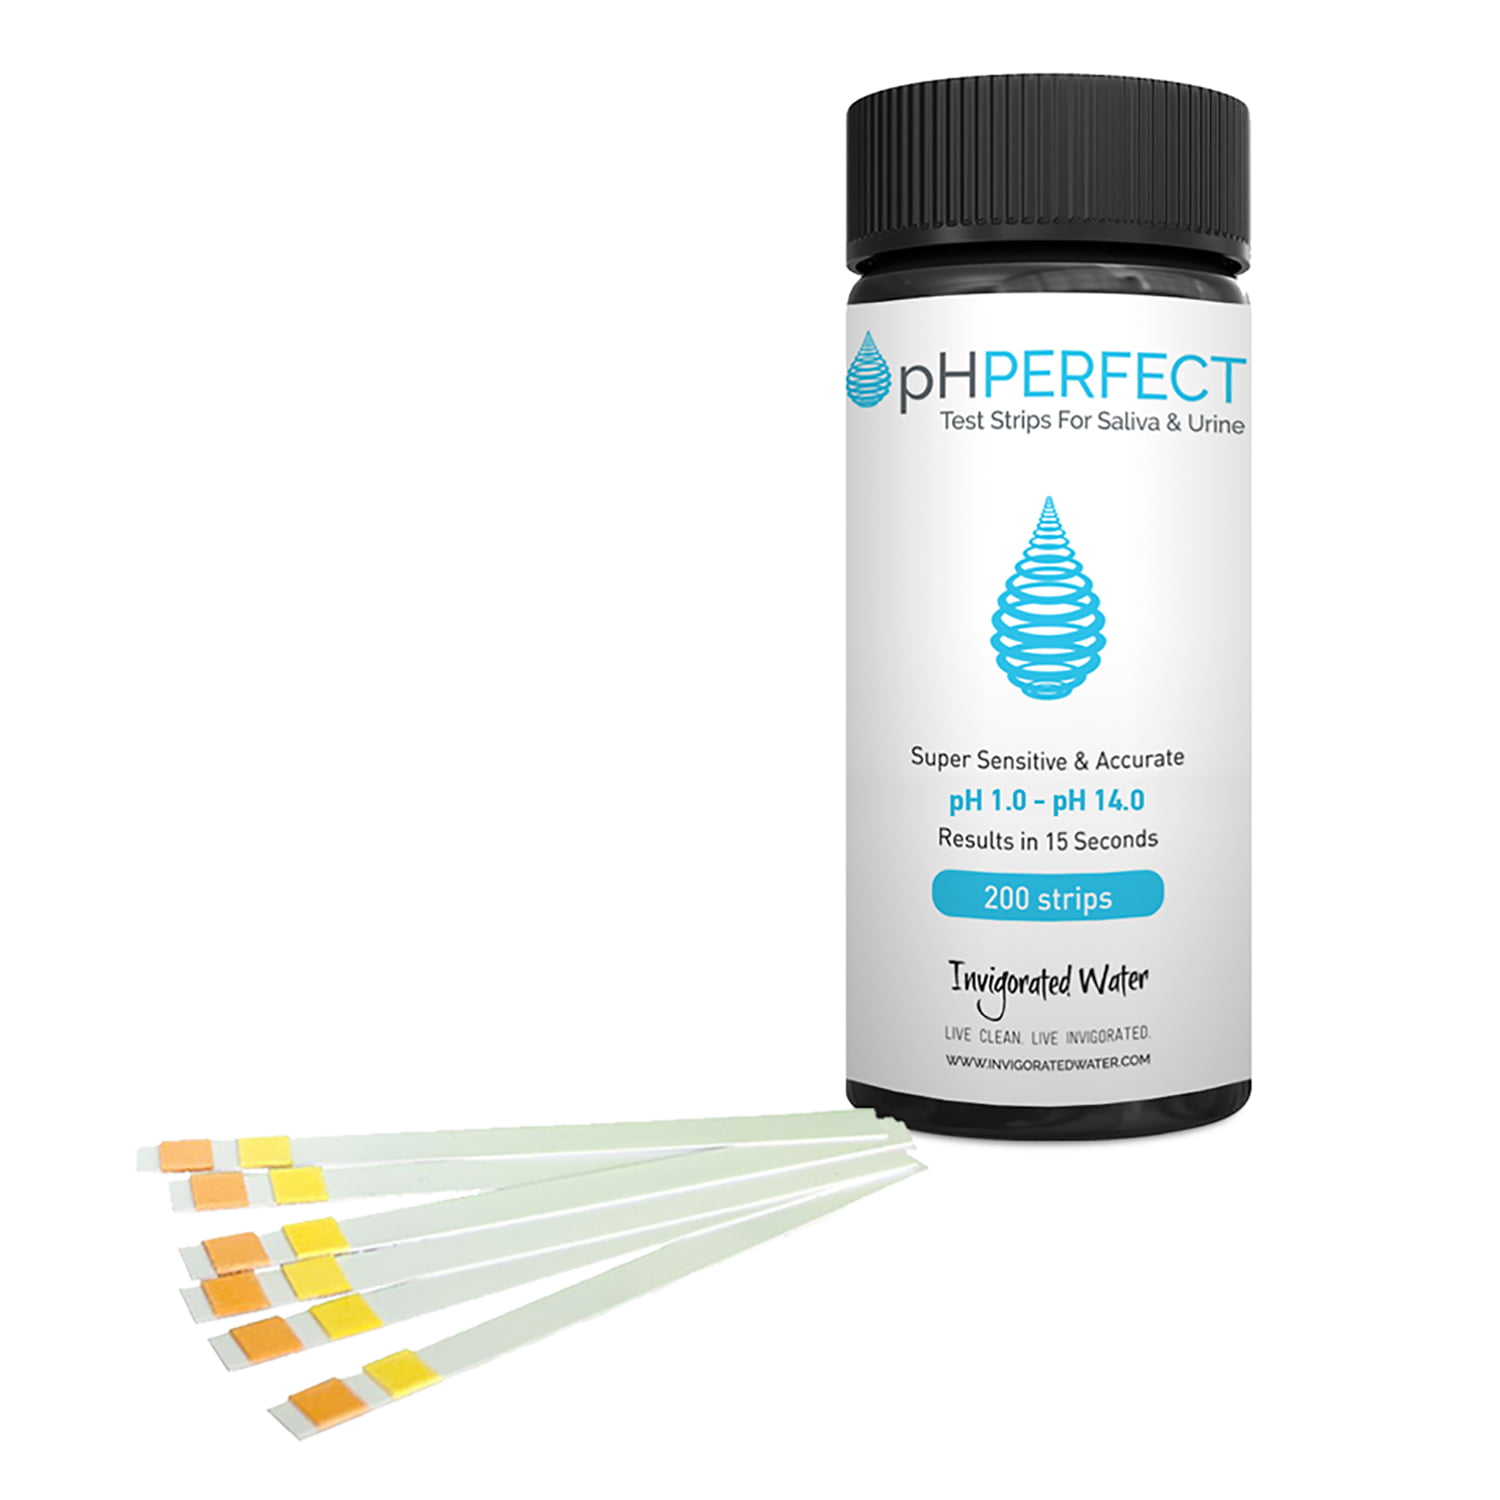 fiets aan de andere kant, Beringstraat pH PERFECT pH Test Strips - pH Test Kit - pH Testing Strips for Urine and  Saliva - Balance Your Bodies pH Level - VALUE PACK Includes 200 Tests -  Walmart.com